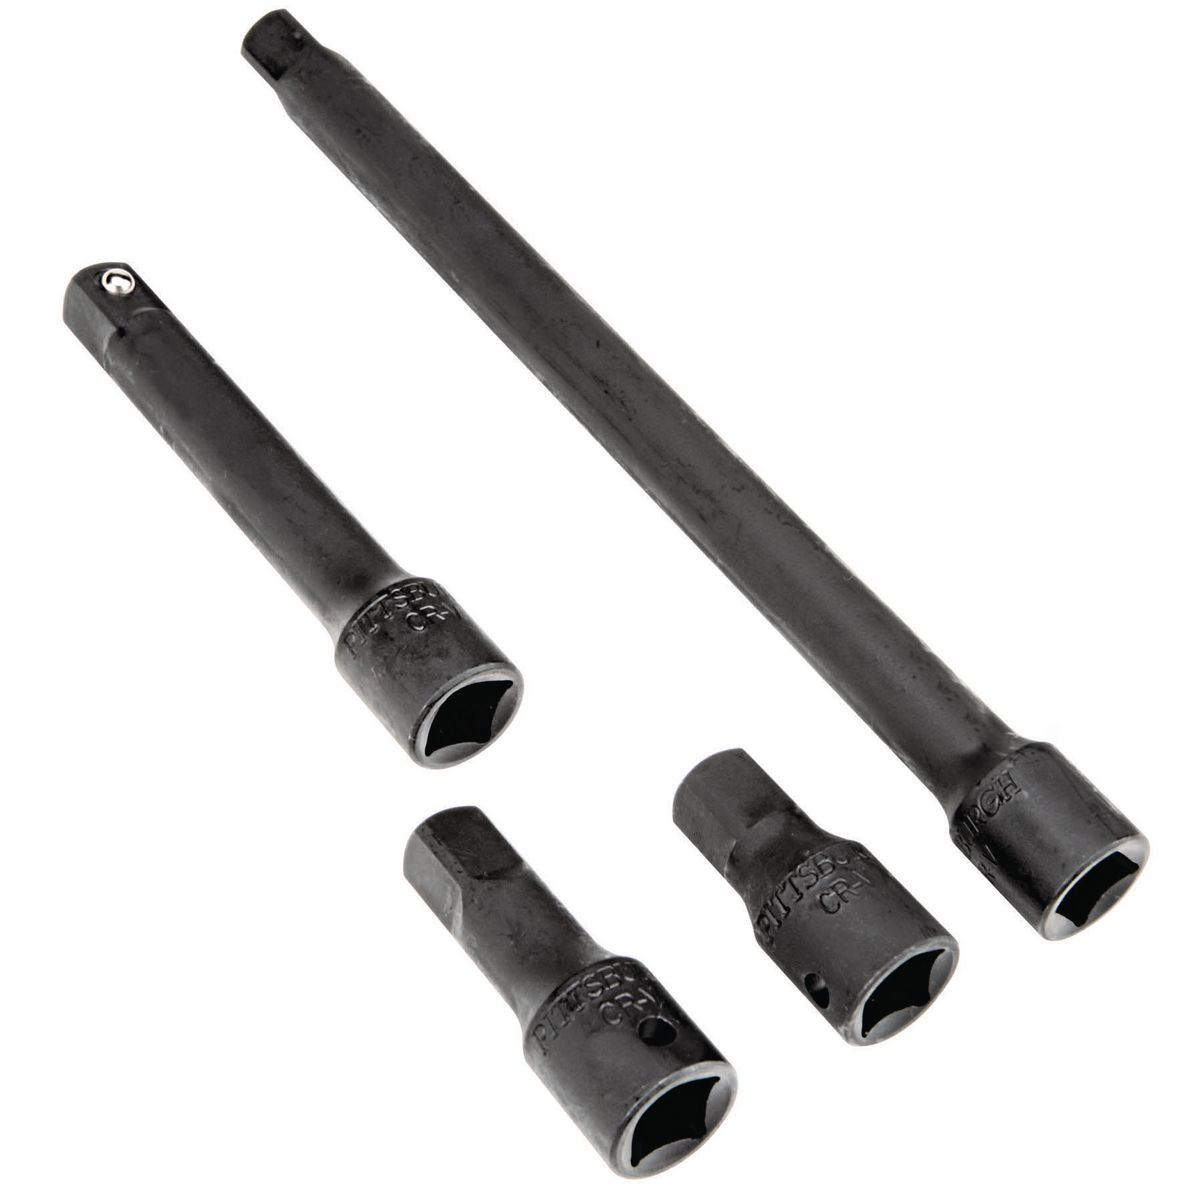 PITTSBURGH 4 Pc 1/2 in. Drive Impact Socket Extension Set - Item 67972 / 02689